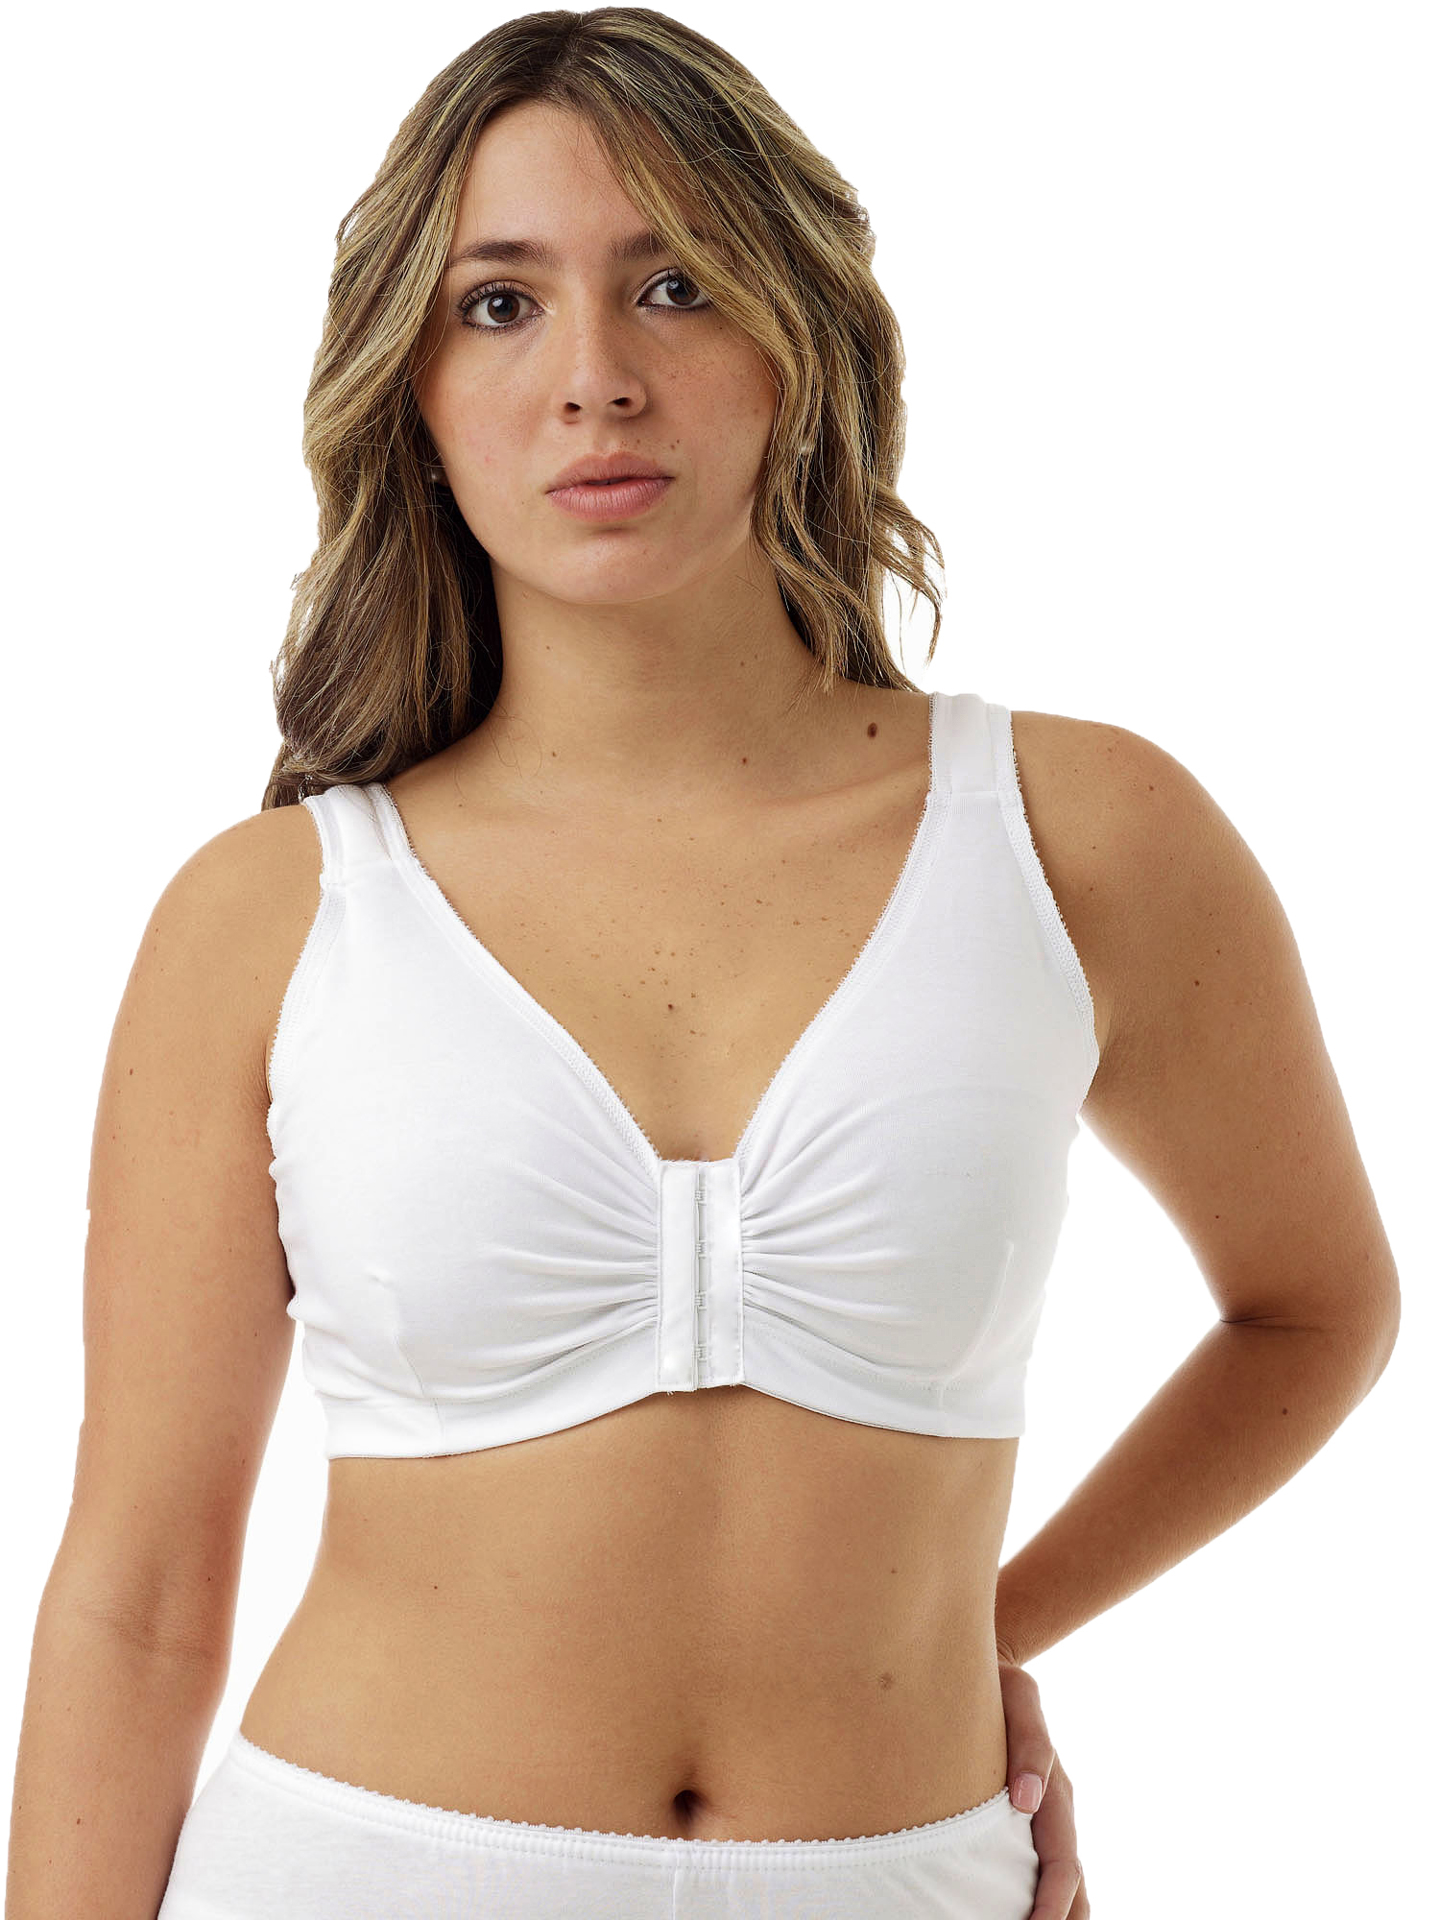 Mastitis and breast engorgement are painful. Wearing right support bras may  ease your journey.